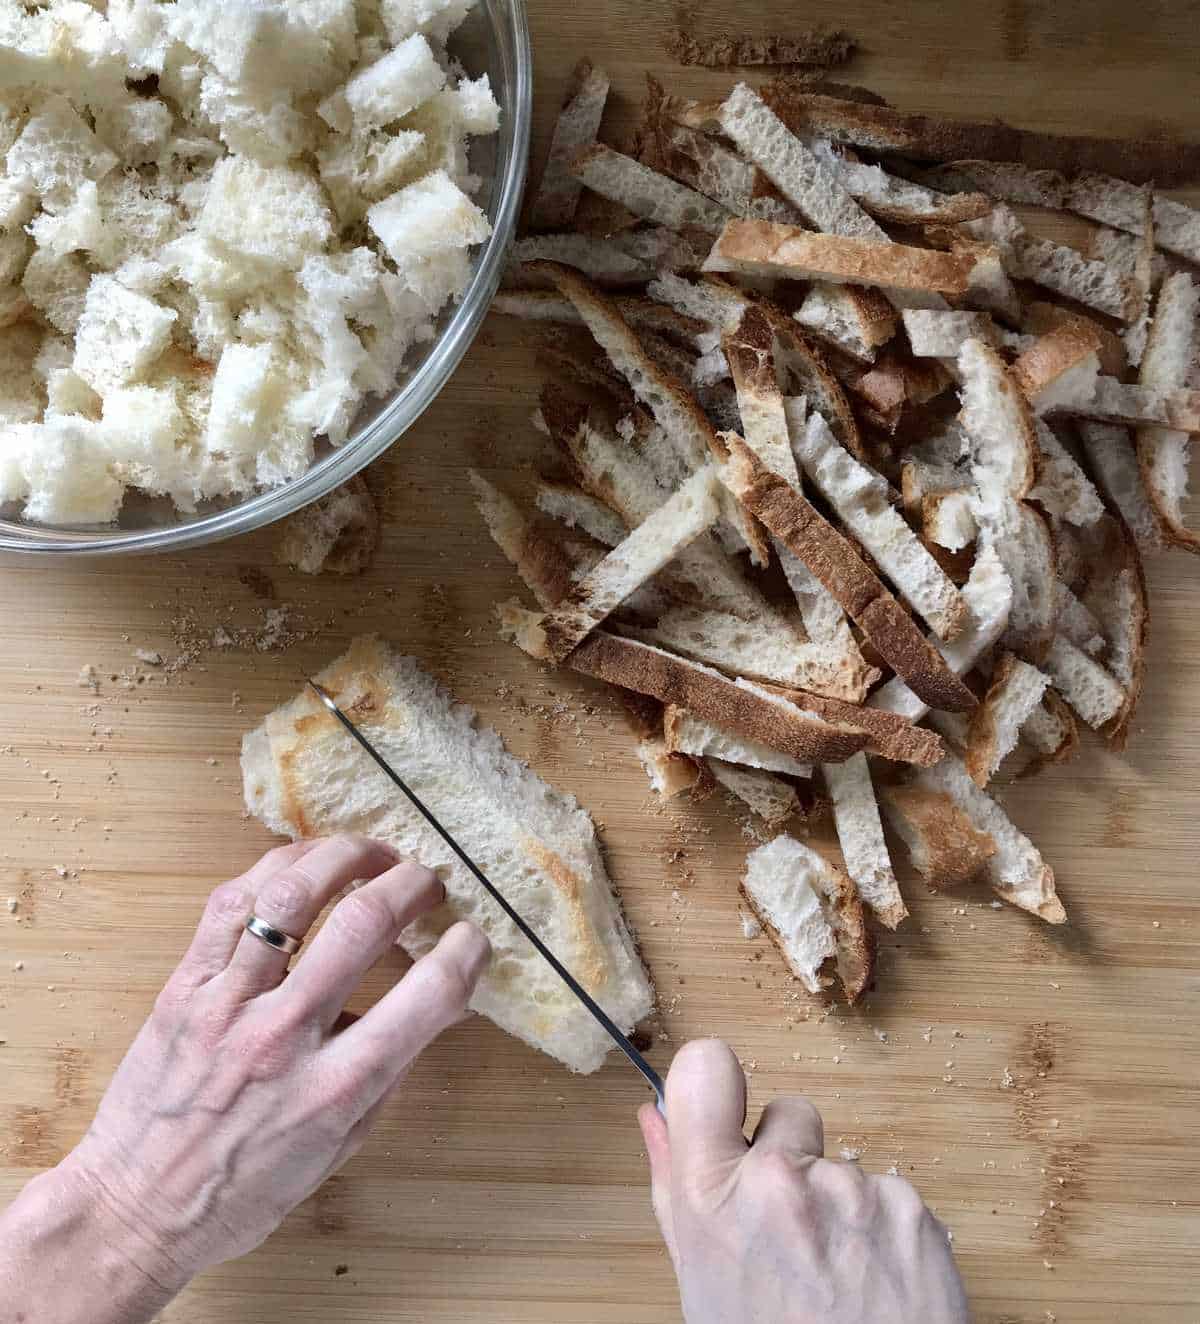 The crusts are being removed form a country style bread.